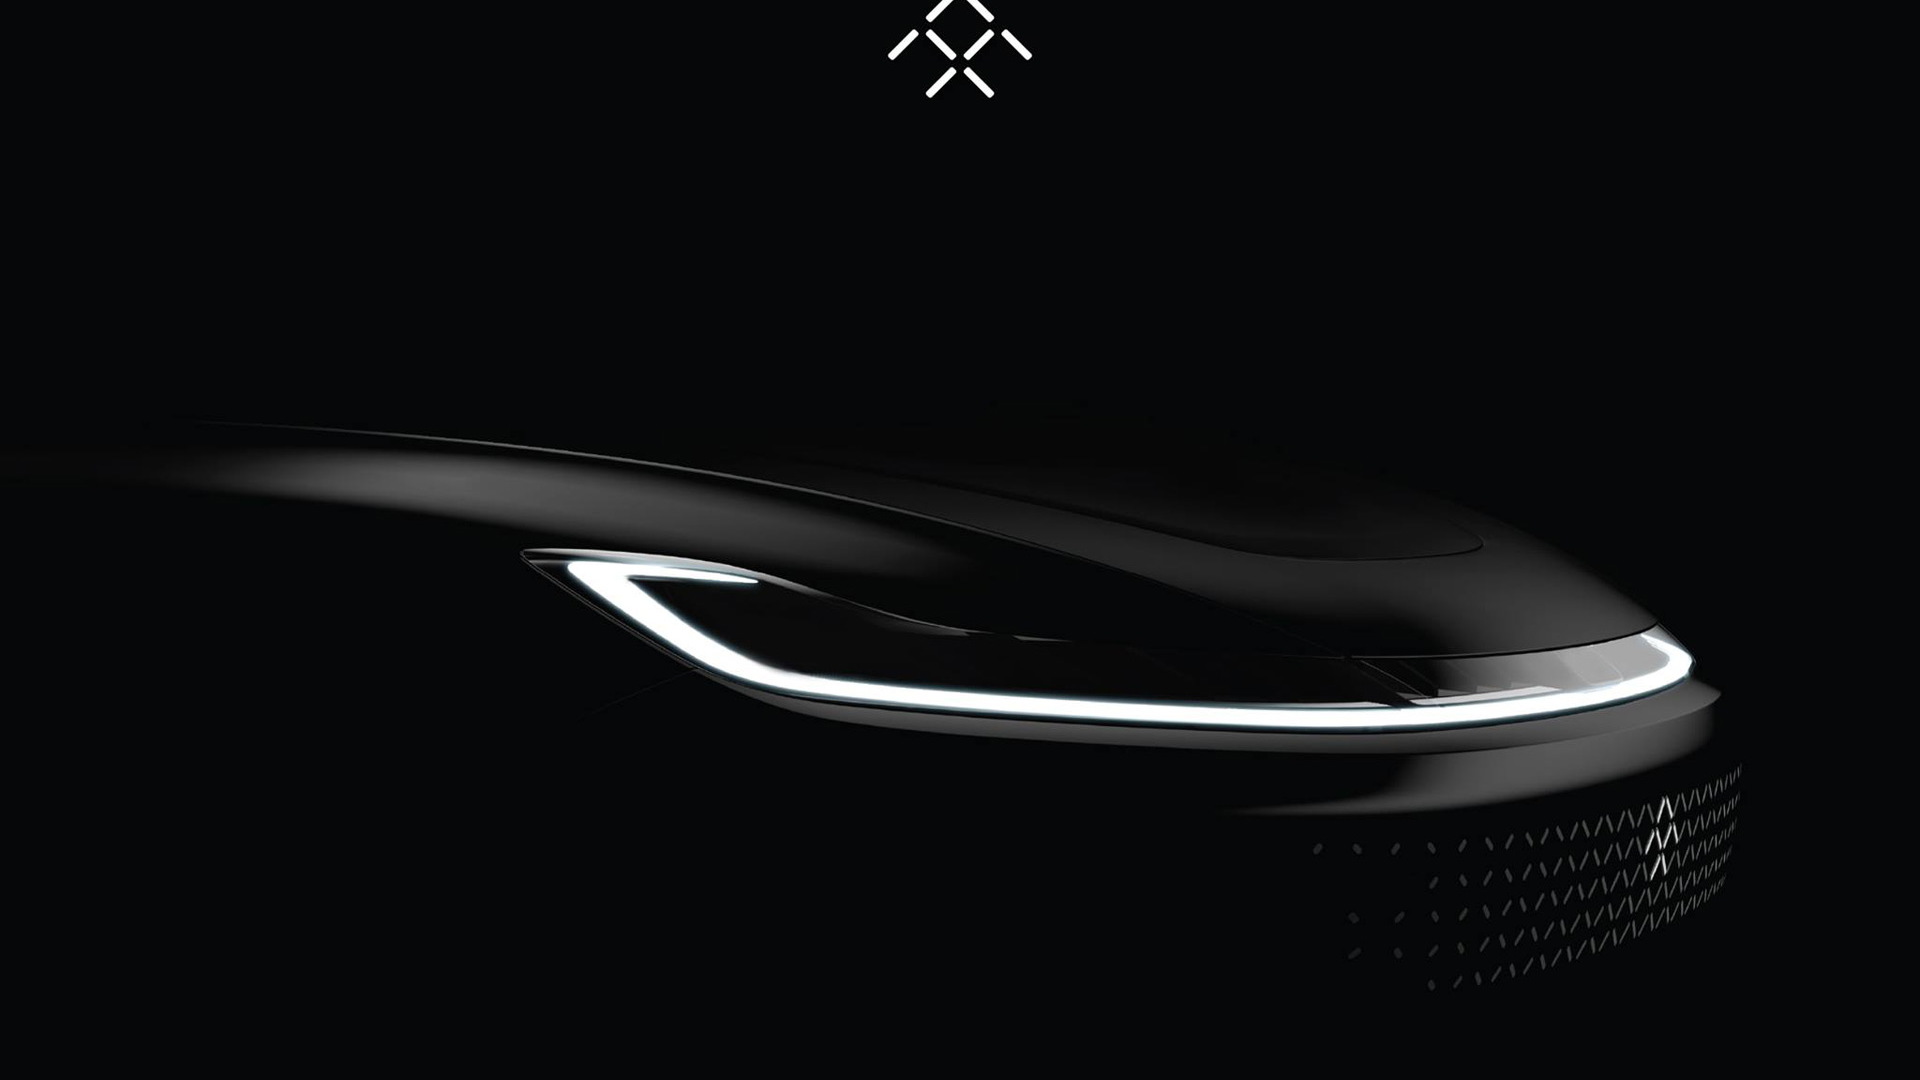 Teaser for Faraday Future electric car debuting at 2017 Consumer Electronics Show